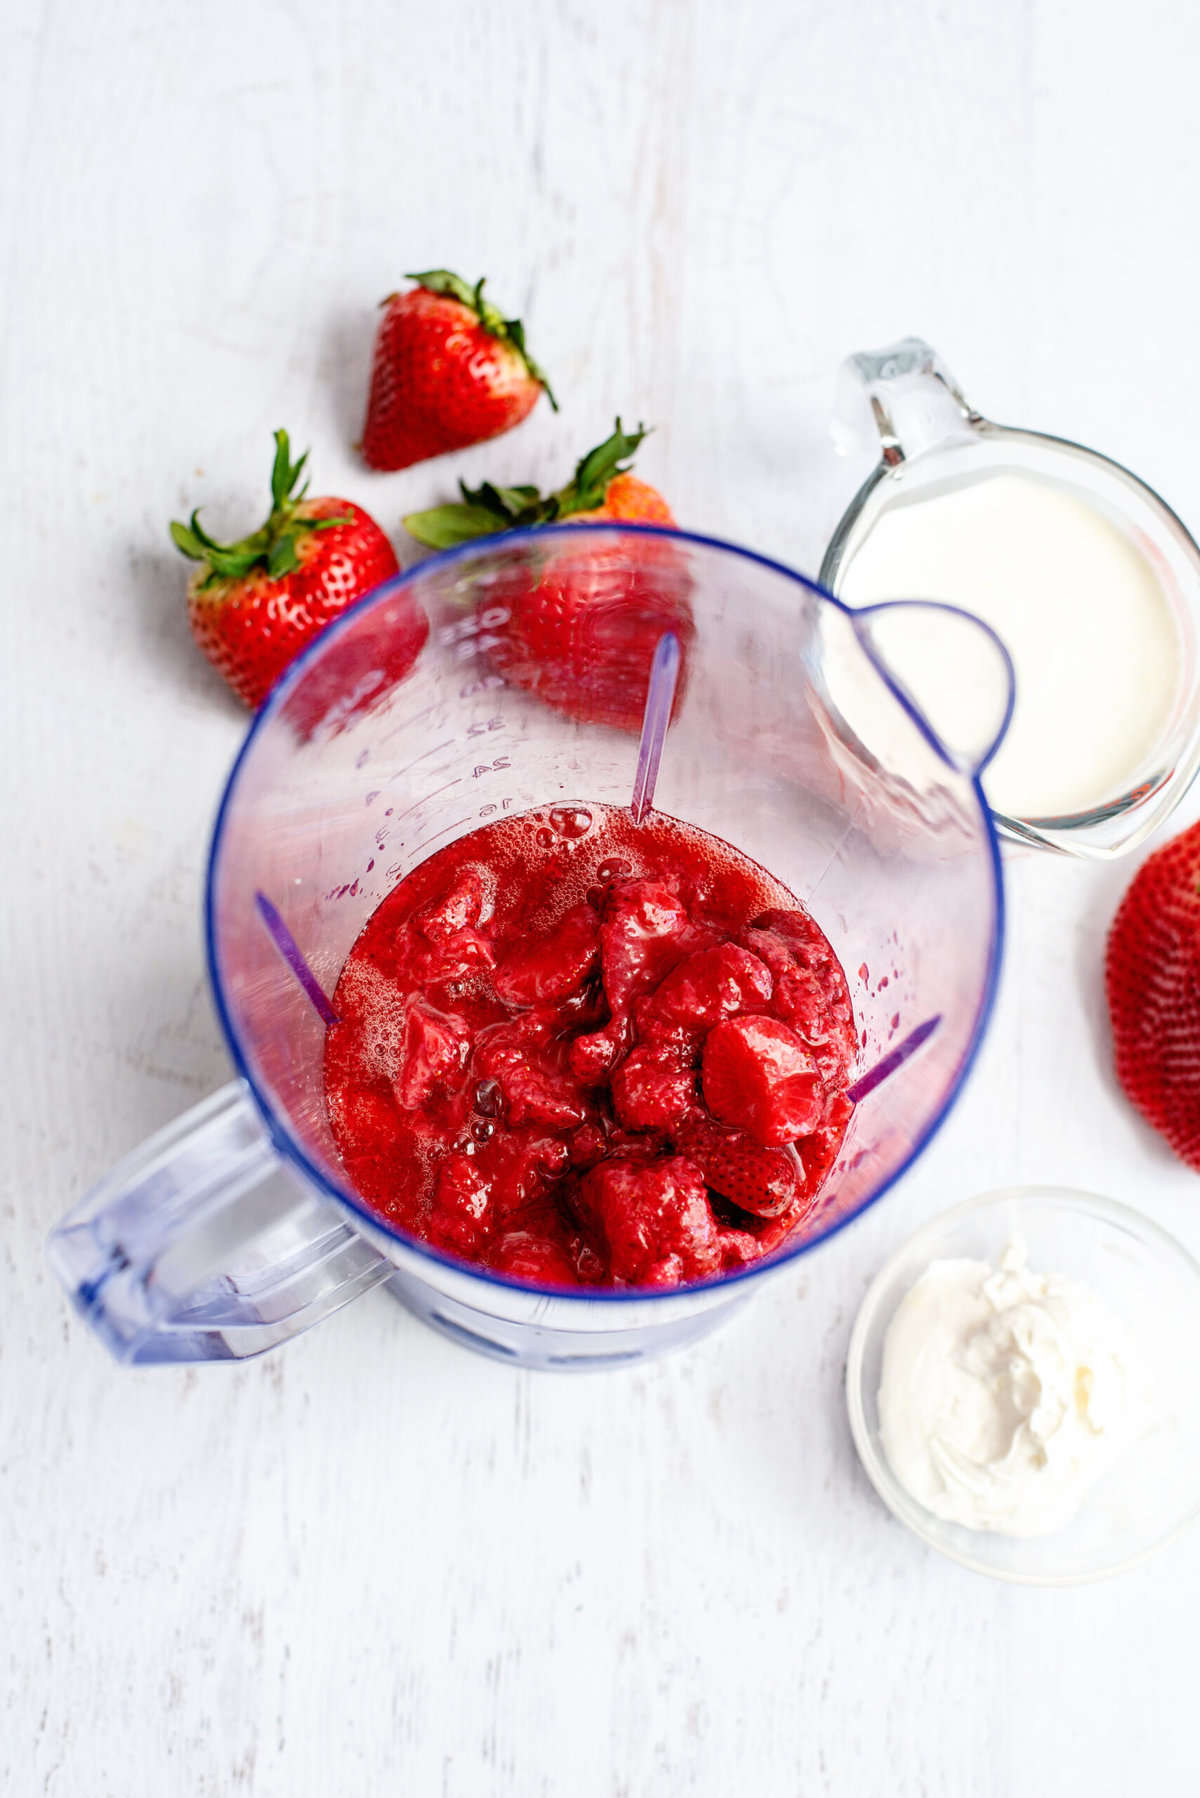 place thawed strawberries in a blender